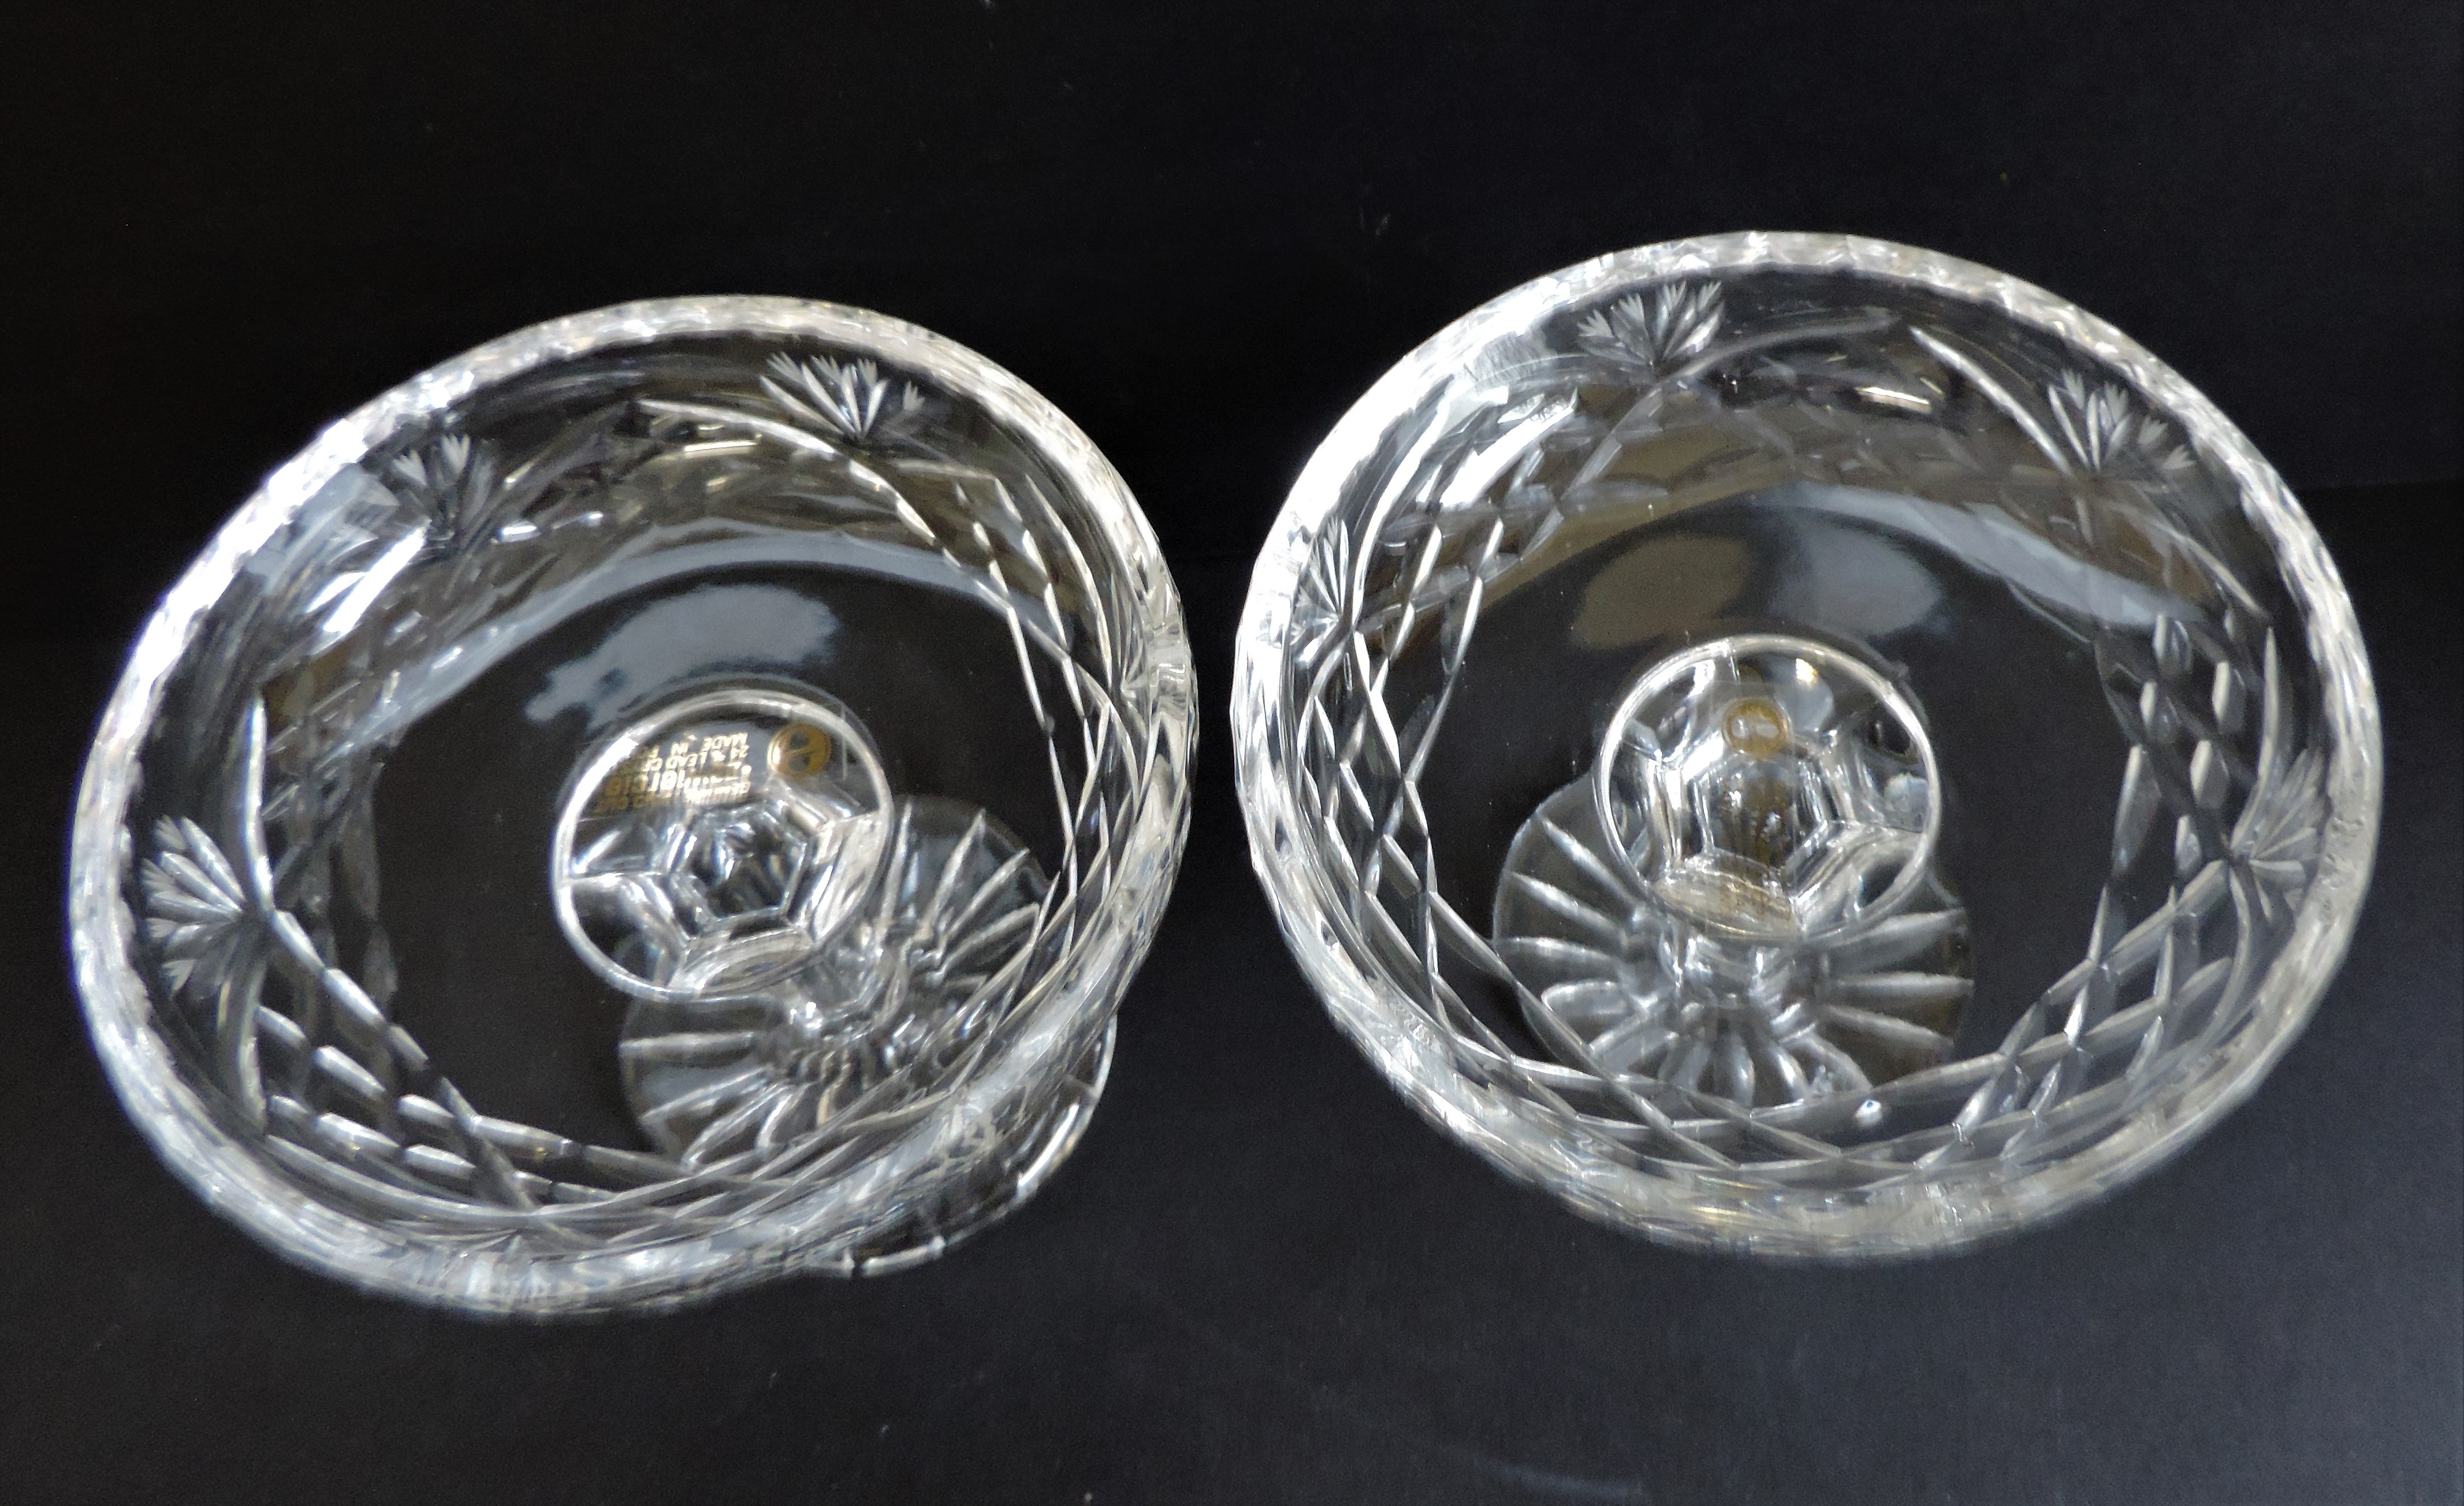 Pair of Hand Cut Crystal Dishes by Zawercie of Poland - Image 3 of 5